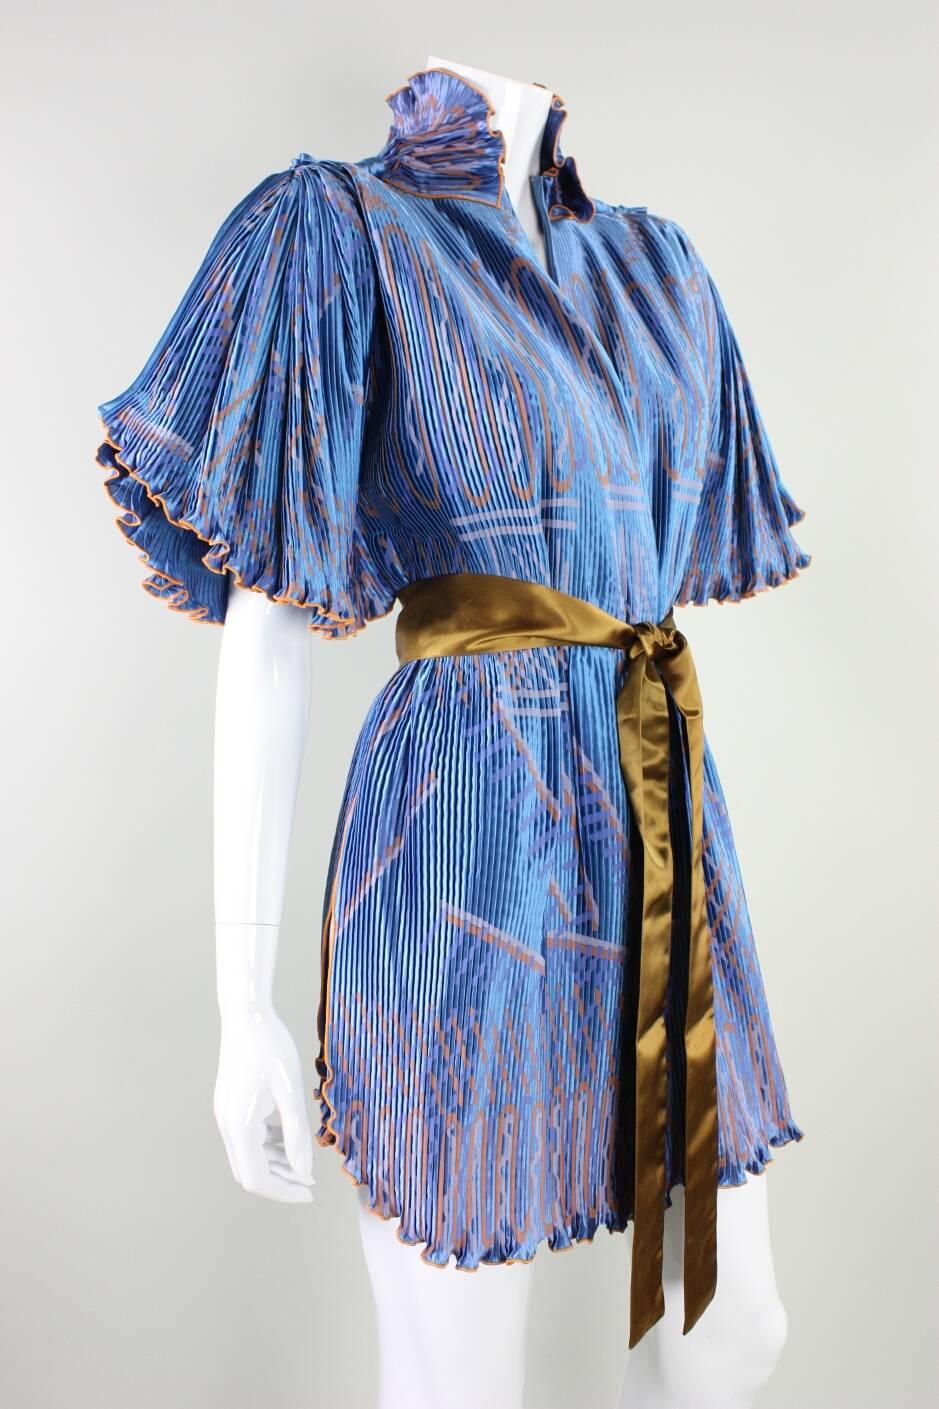 Vintage jacket from Zandra Rhodes dates to the 1970's through 1980's and is made of cornflower blue pleated rayon with an abstract pattern silkscreened throughout.  Detached sash also has the Zandra Rhodes label. Jacket is unlined and has no